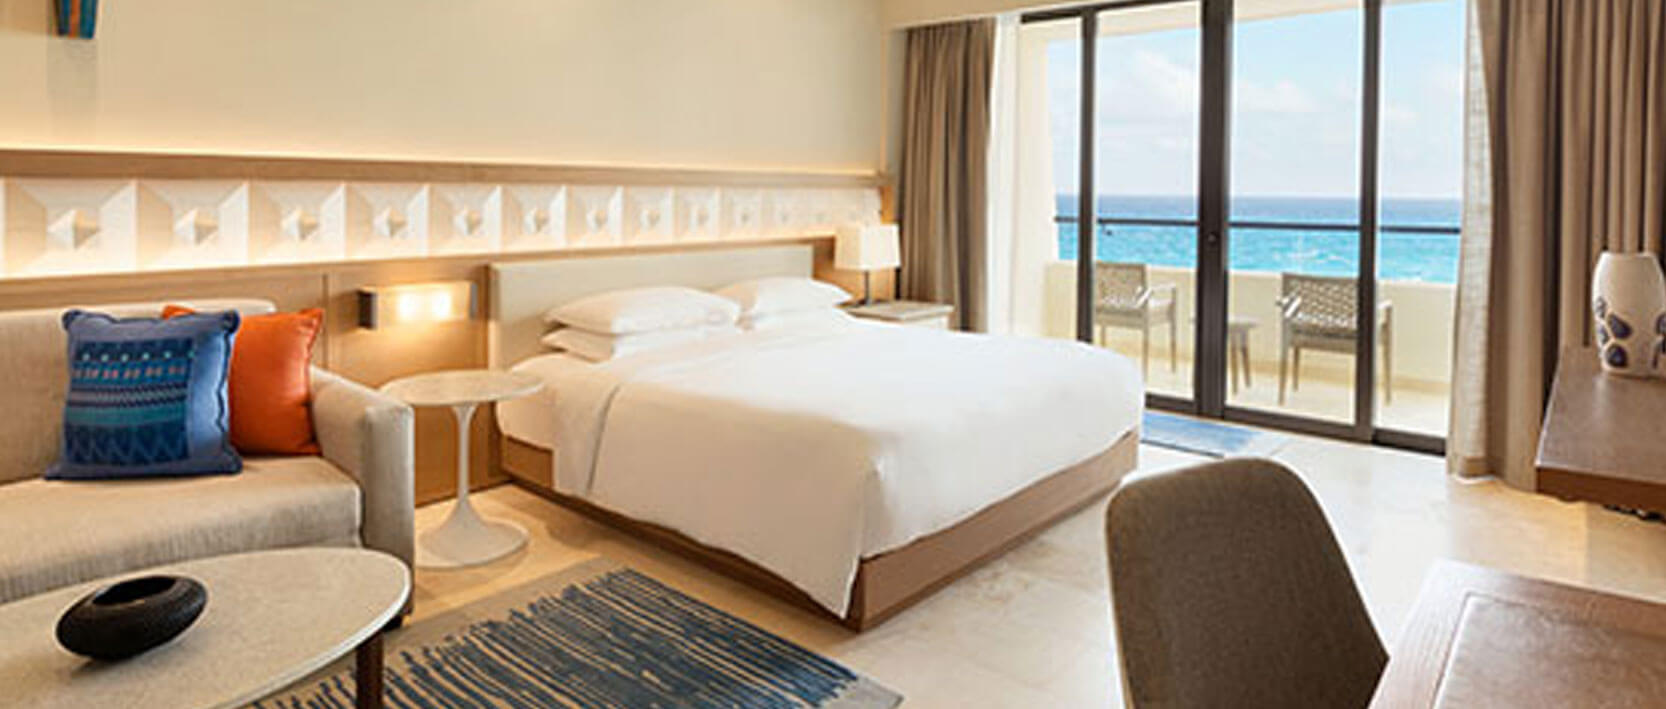 Hyatt Ziva Cancun Accommodations - Oceanfront Pyramid Suite (With Sofa Bed)